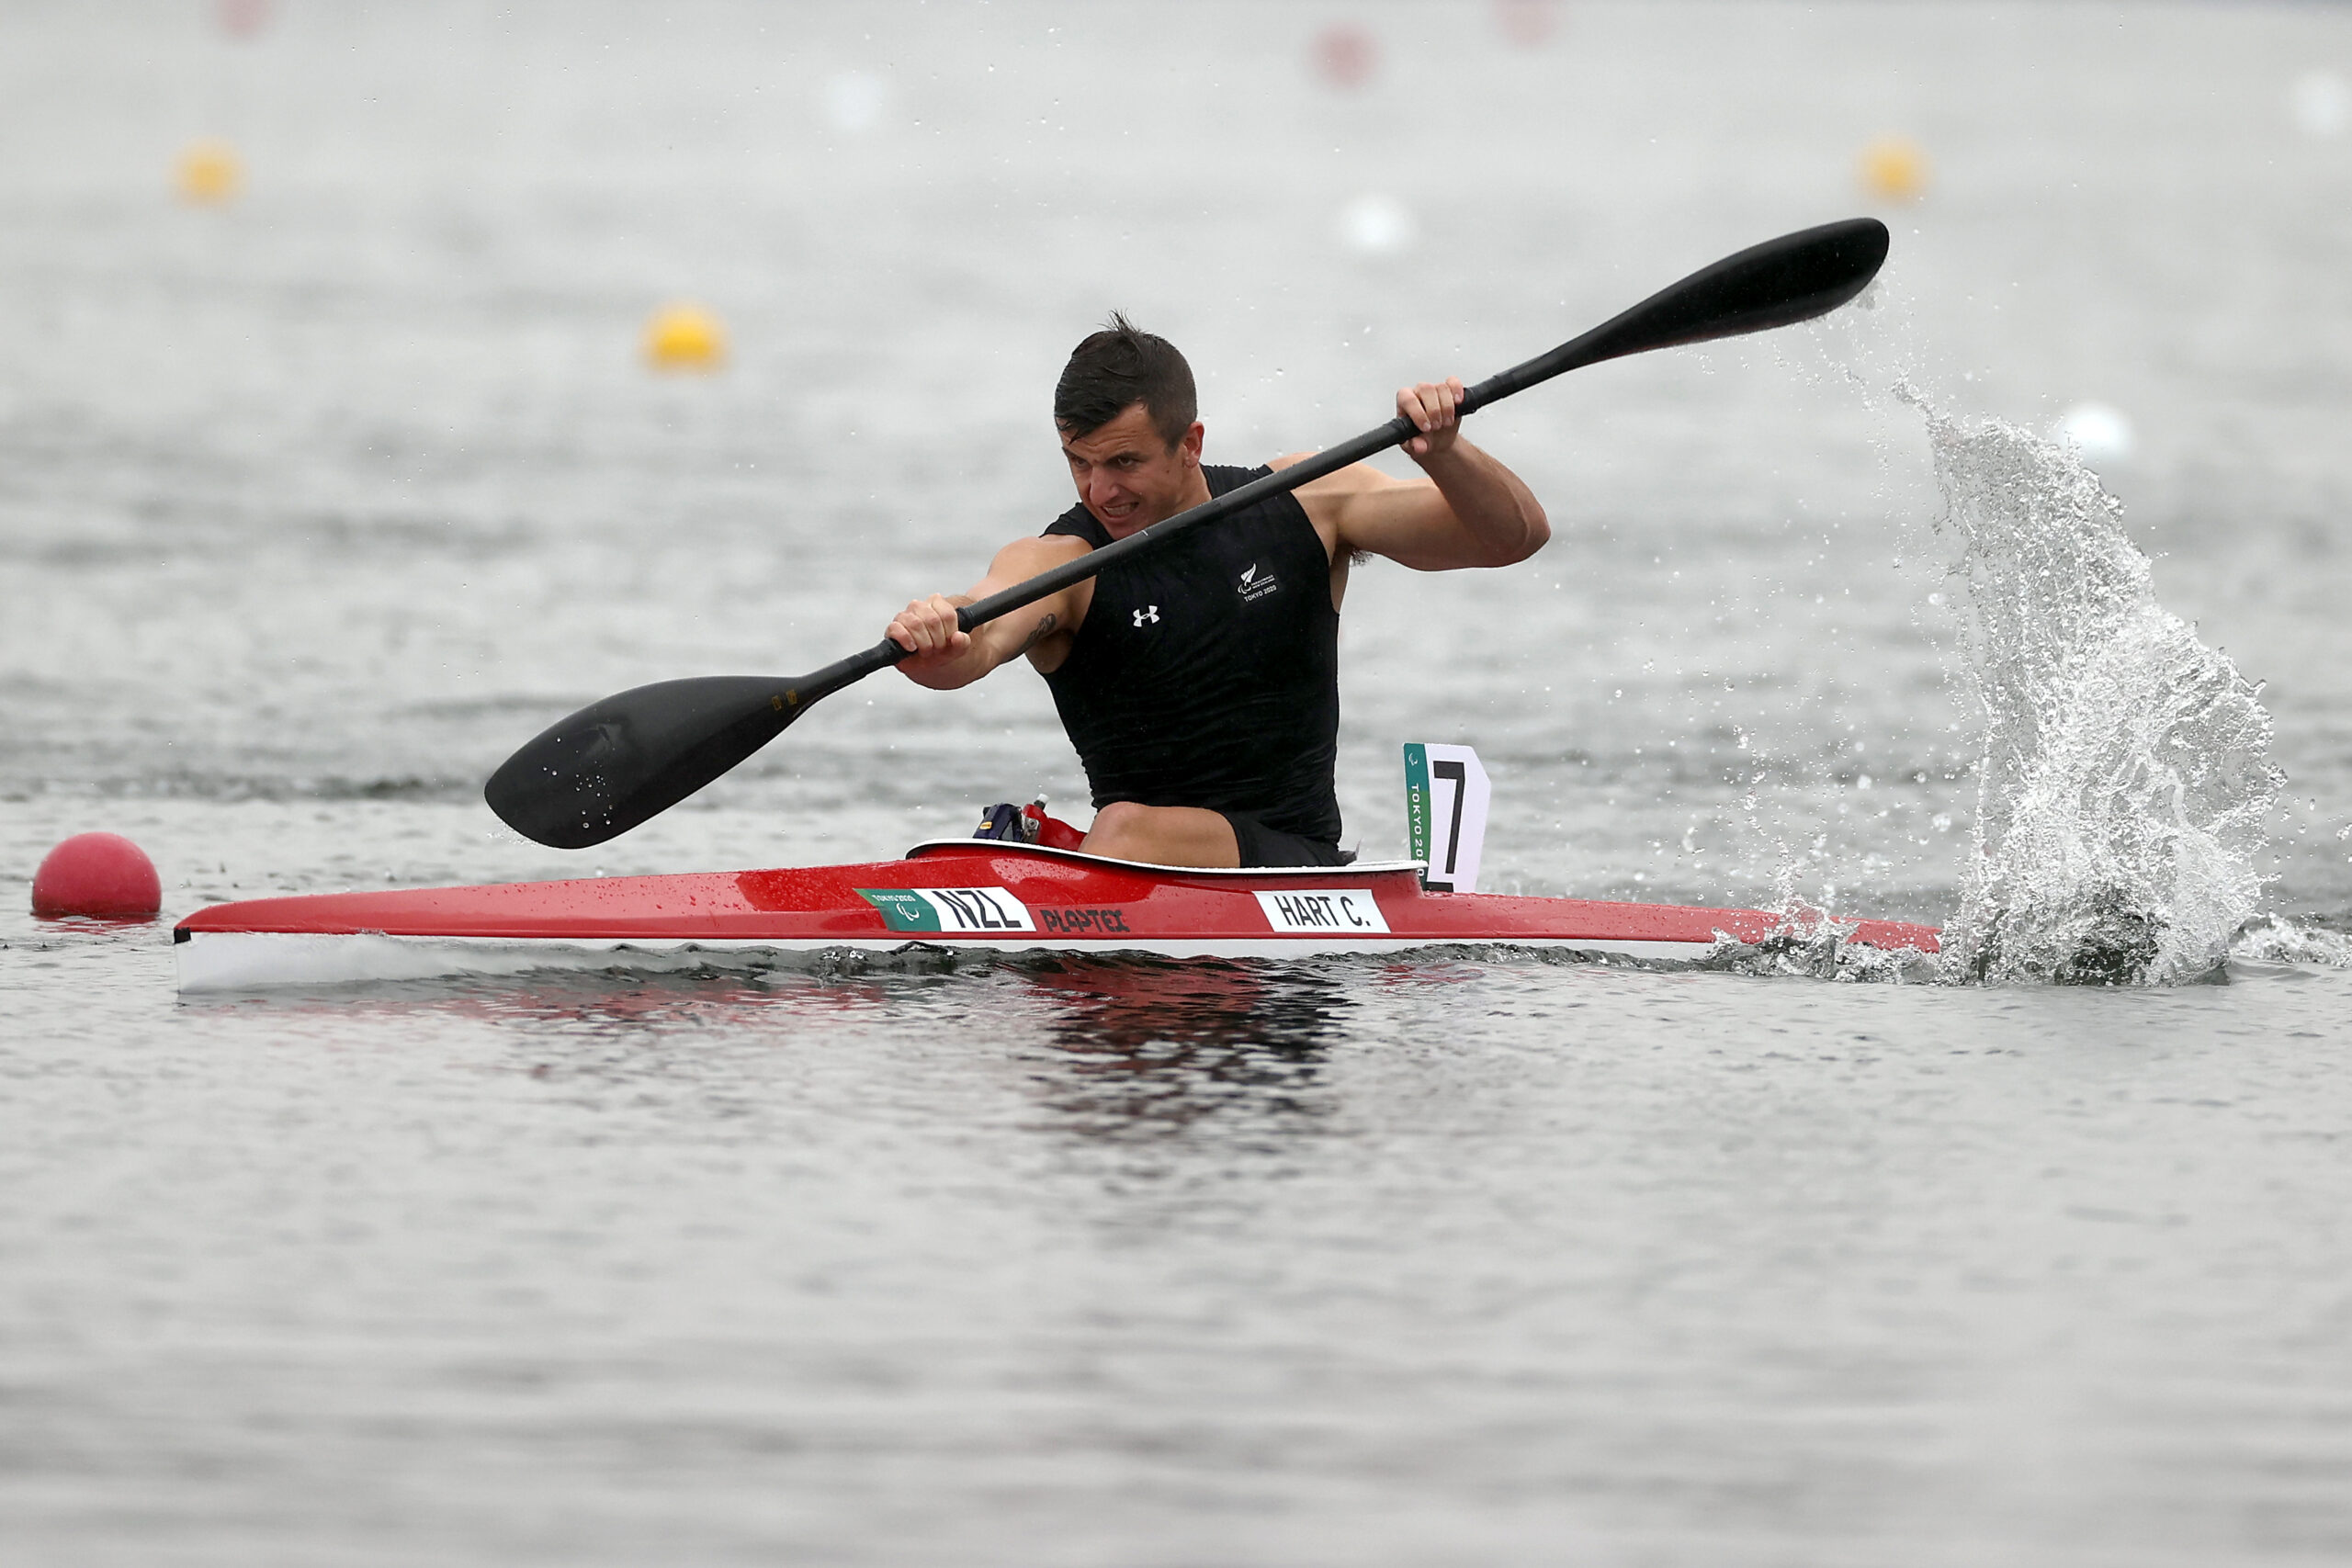 TOKYO, JAPAN - SEPTEMBER 03: Corbin Hart of Team New Zealand competes in the Men's Canoe Sprint Kayak Single 200m - KL3 or MKL3 Semi-Final 2 on day 10 of the Tokyo 2020 Paralympic Games at Sea Forest Waterway on September 02, 2021 in Tokyo, Japan. (Photo by Dean Mouhtaropoulos/Getty Images for New Zealand Paralympic Committee)